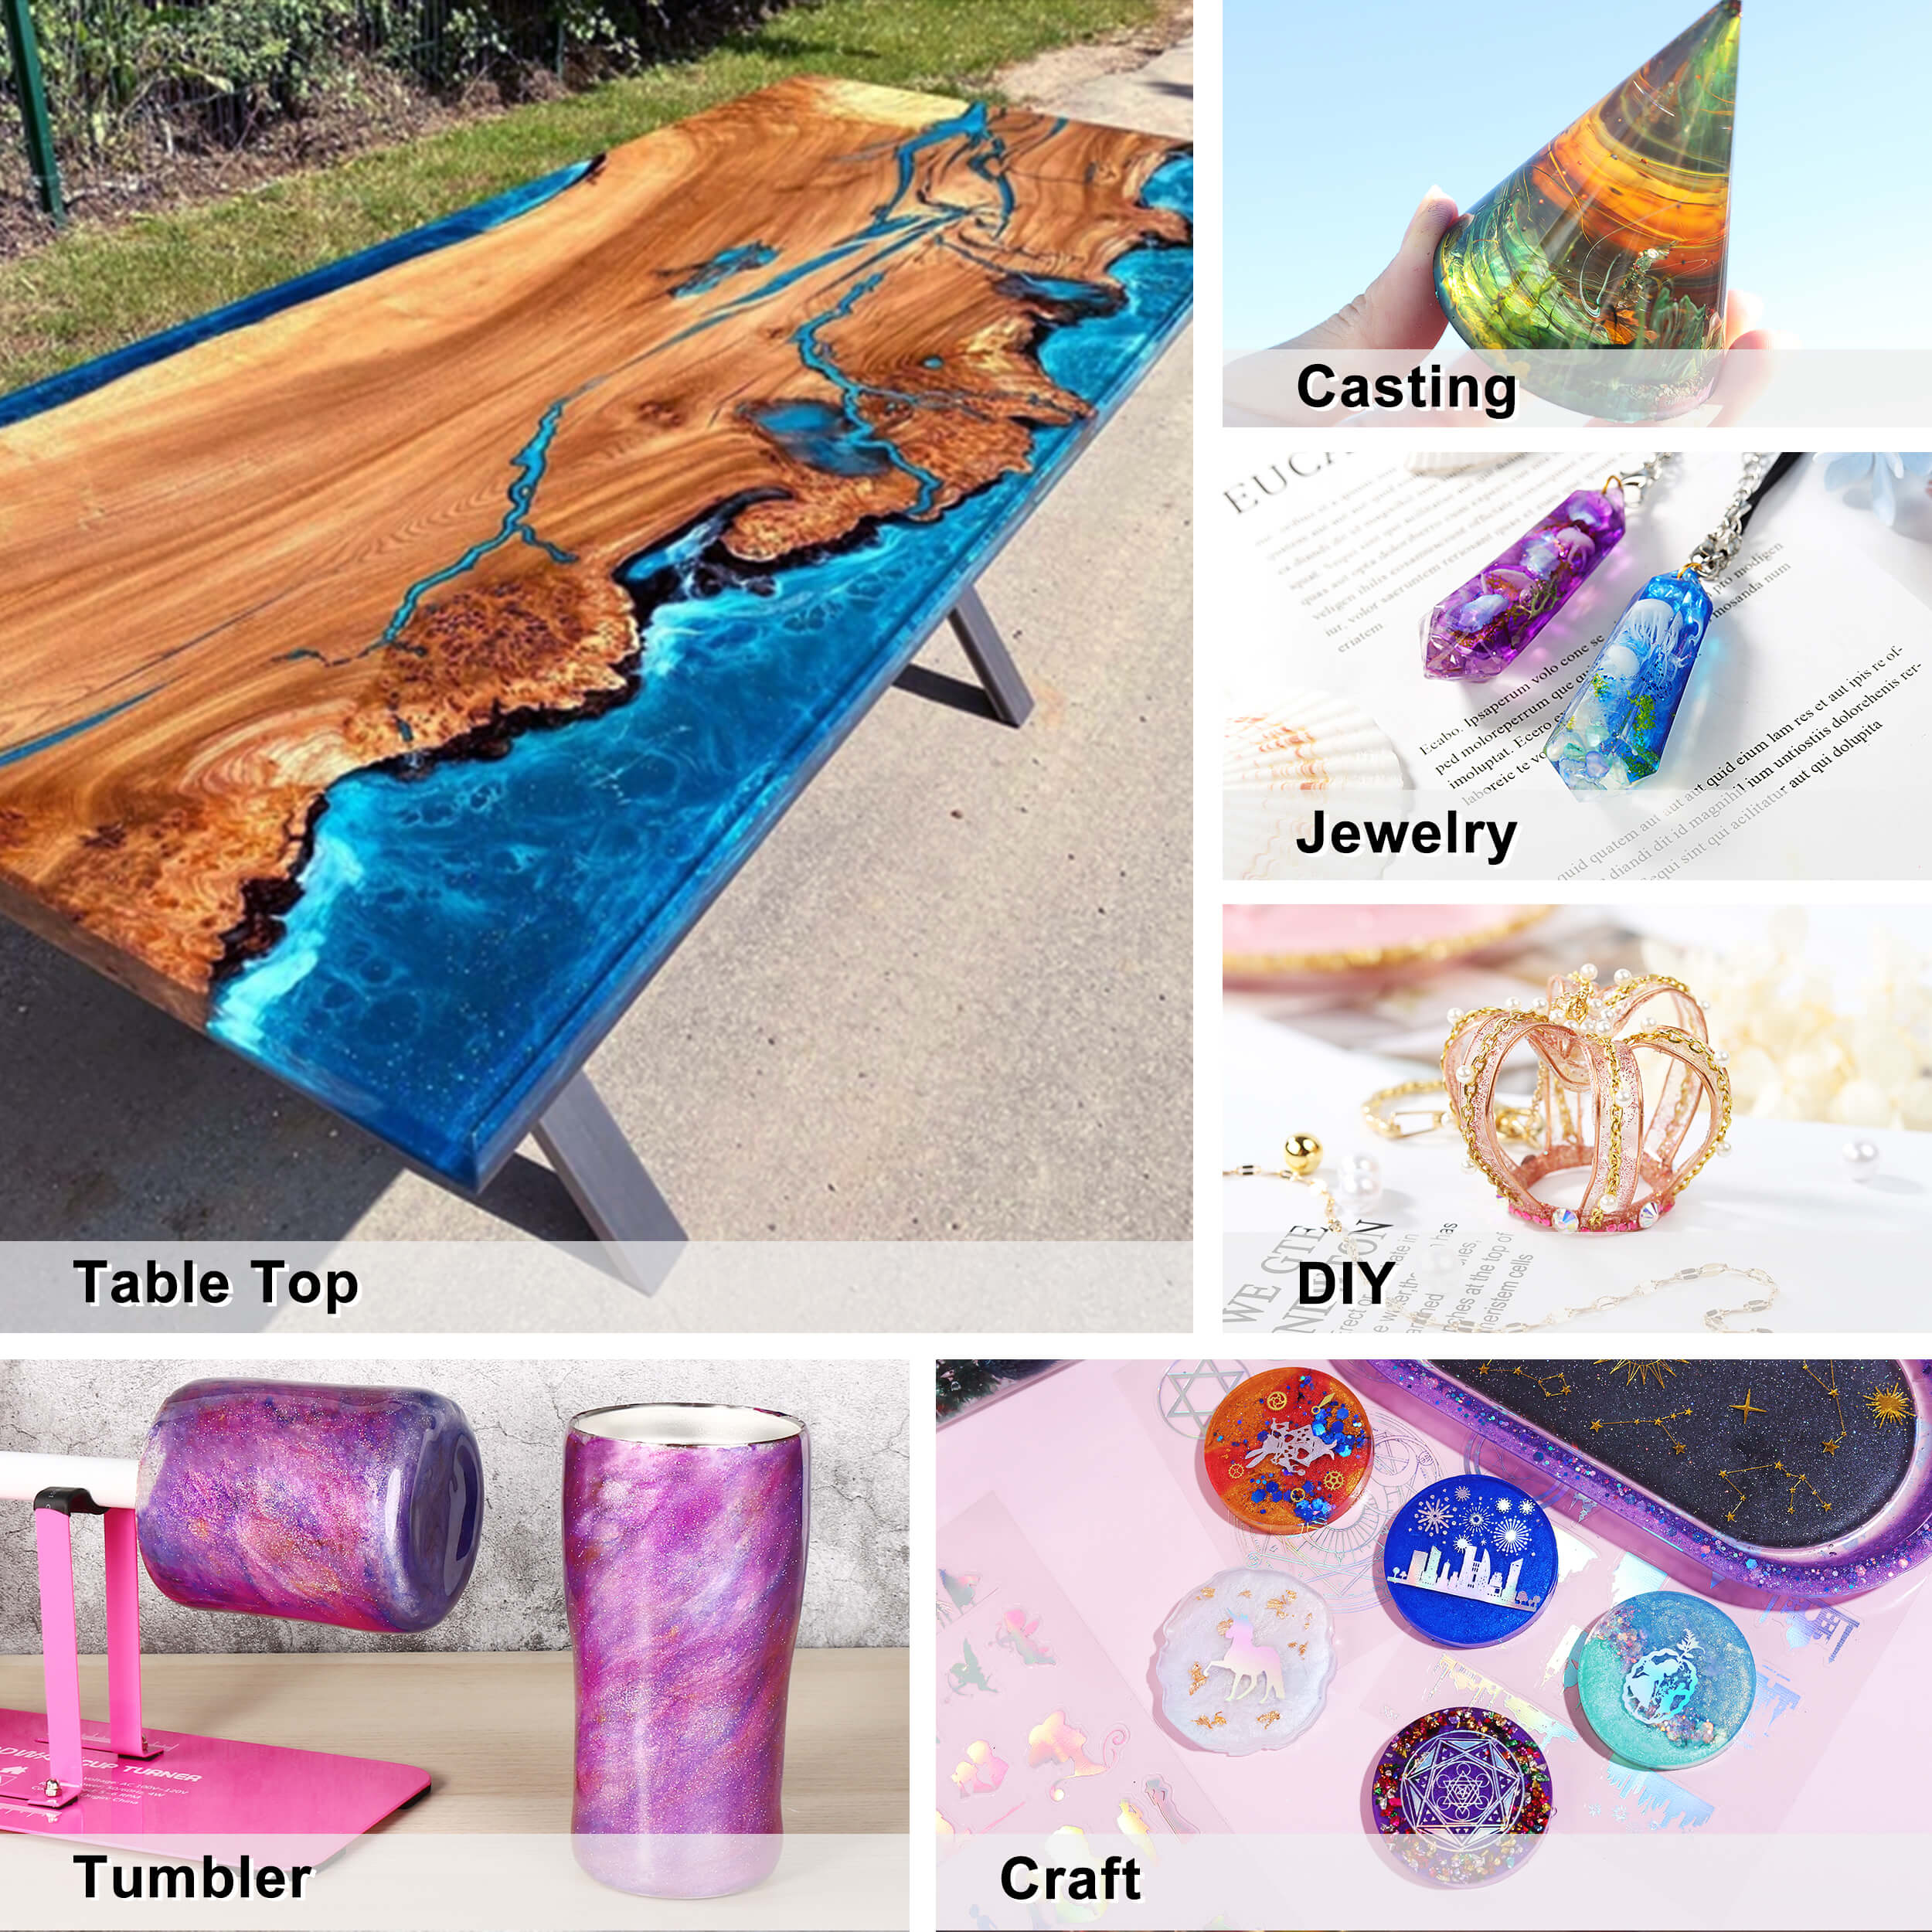 Let's Resin 1 Gallon Clear Epoxy Resin Kit, Bubble Free & Crystal Clear Epoxy Resin for Countertops, River Tables, Table Top, Coating, Casting